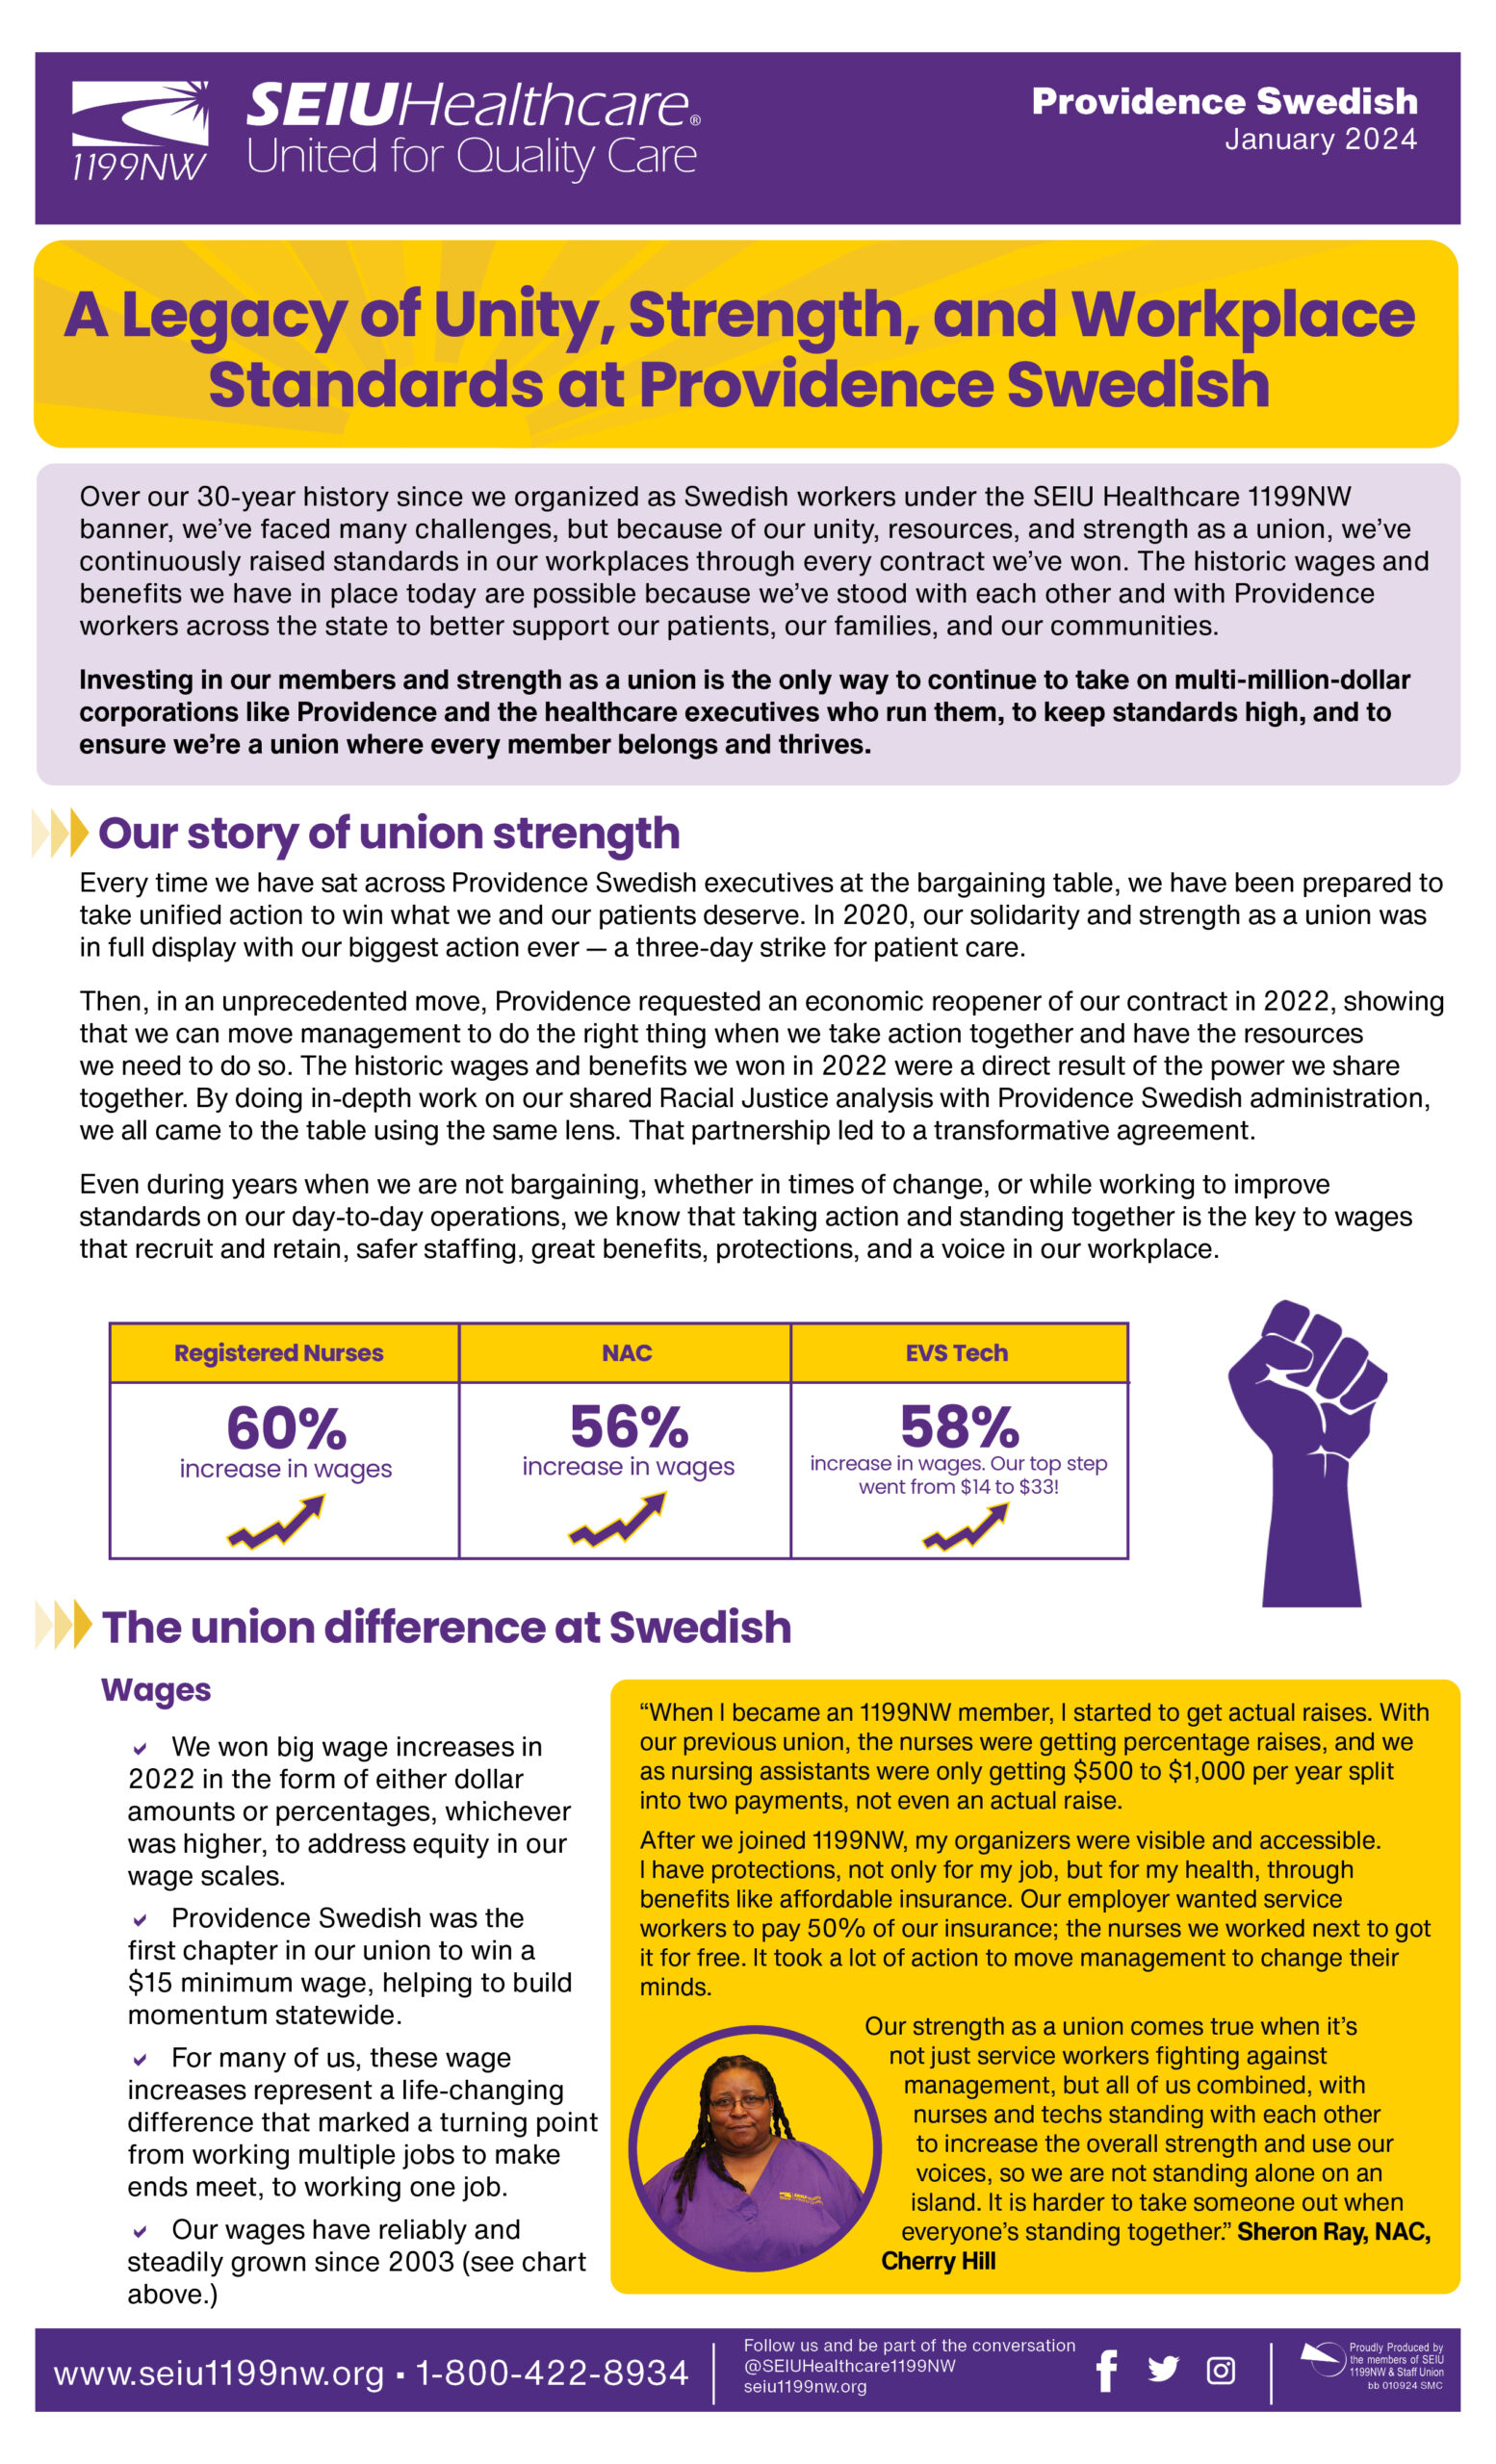 A Legacy of Unity, Strength, and Workplace Standards at Providence Swedish